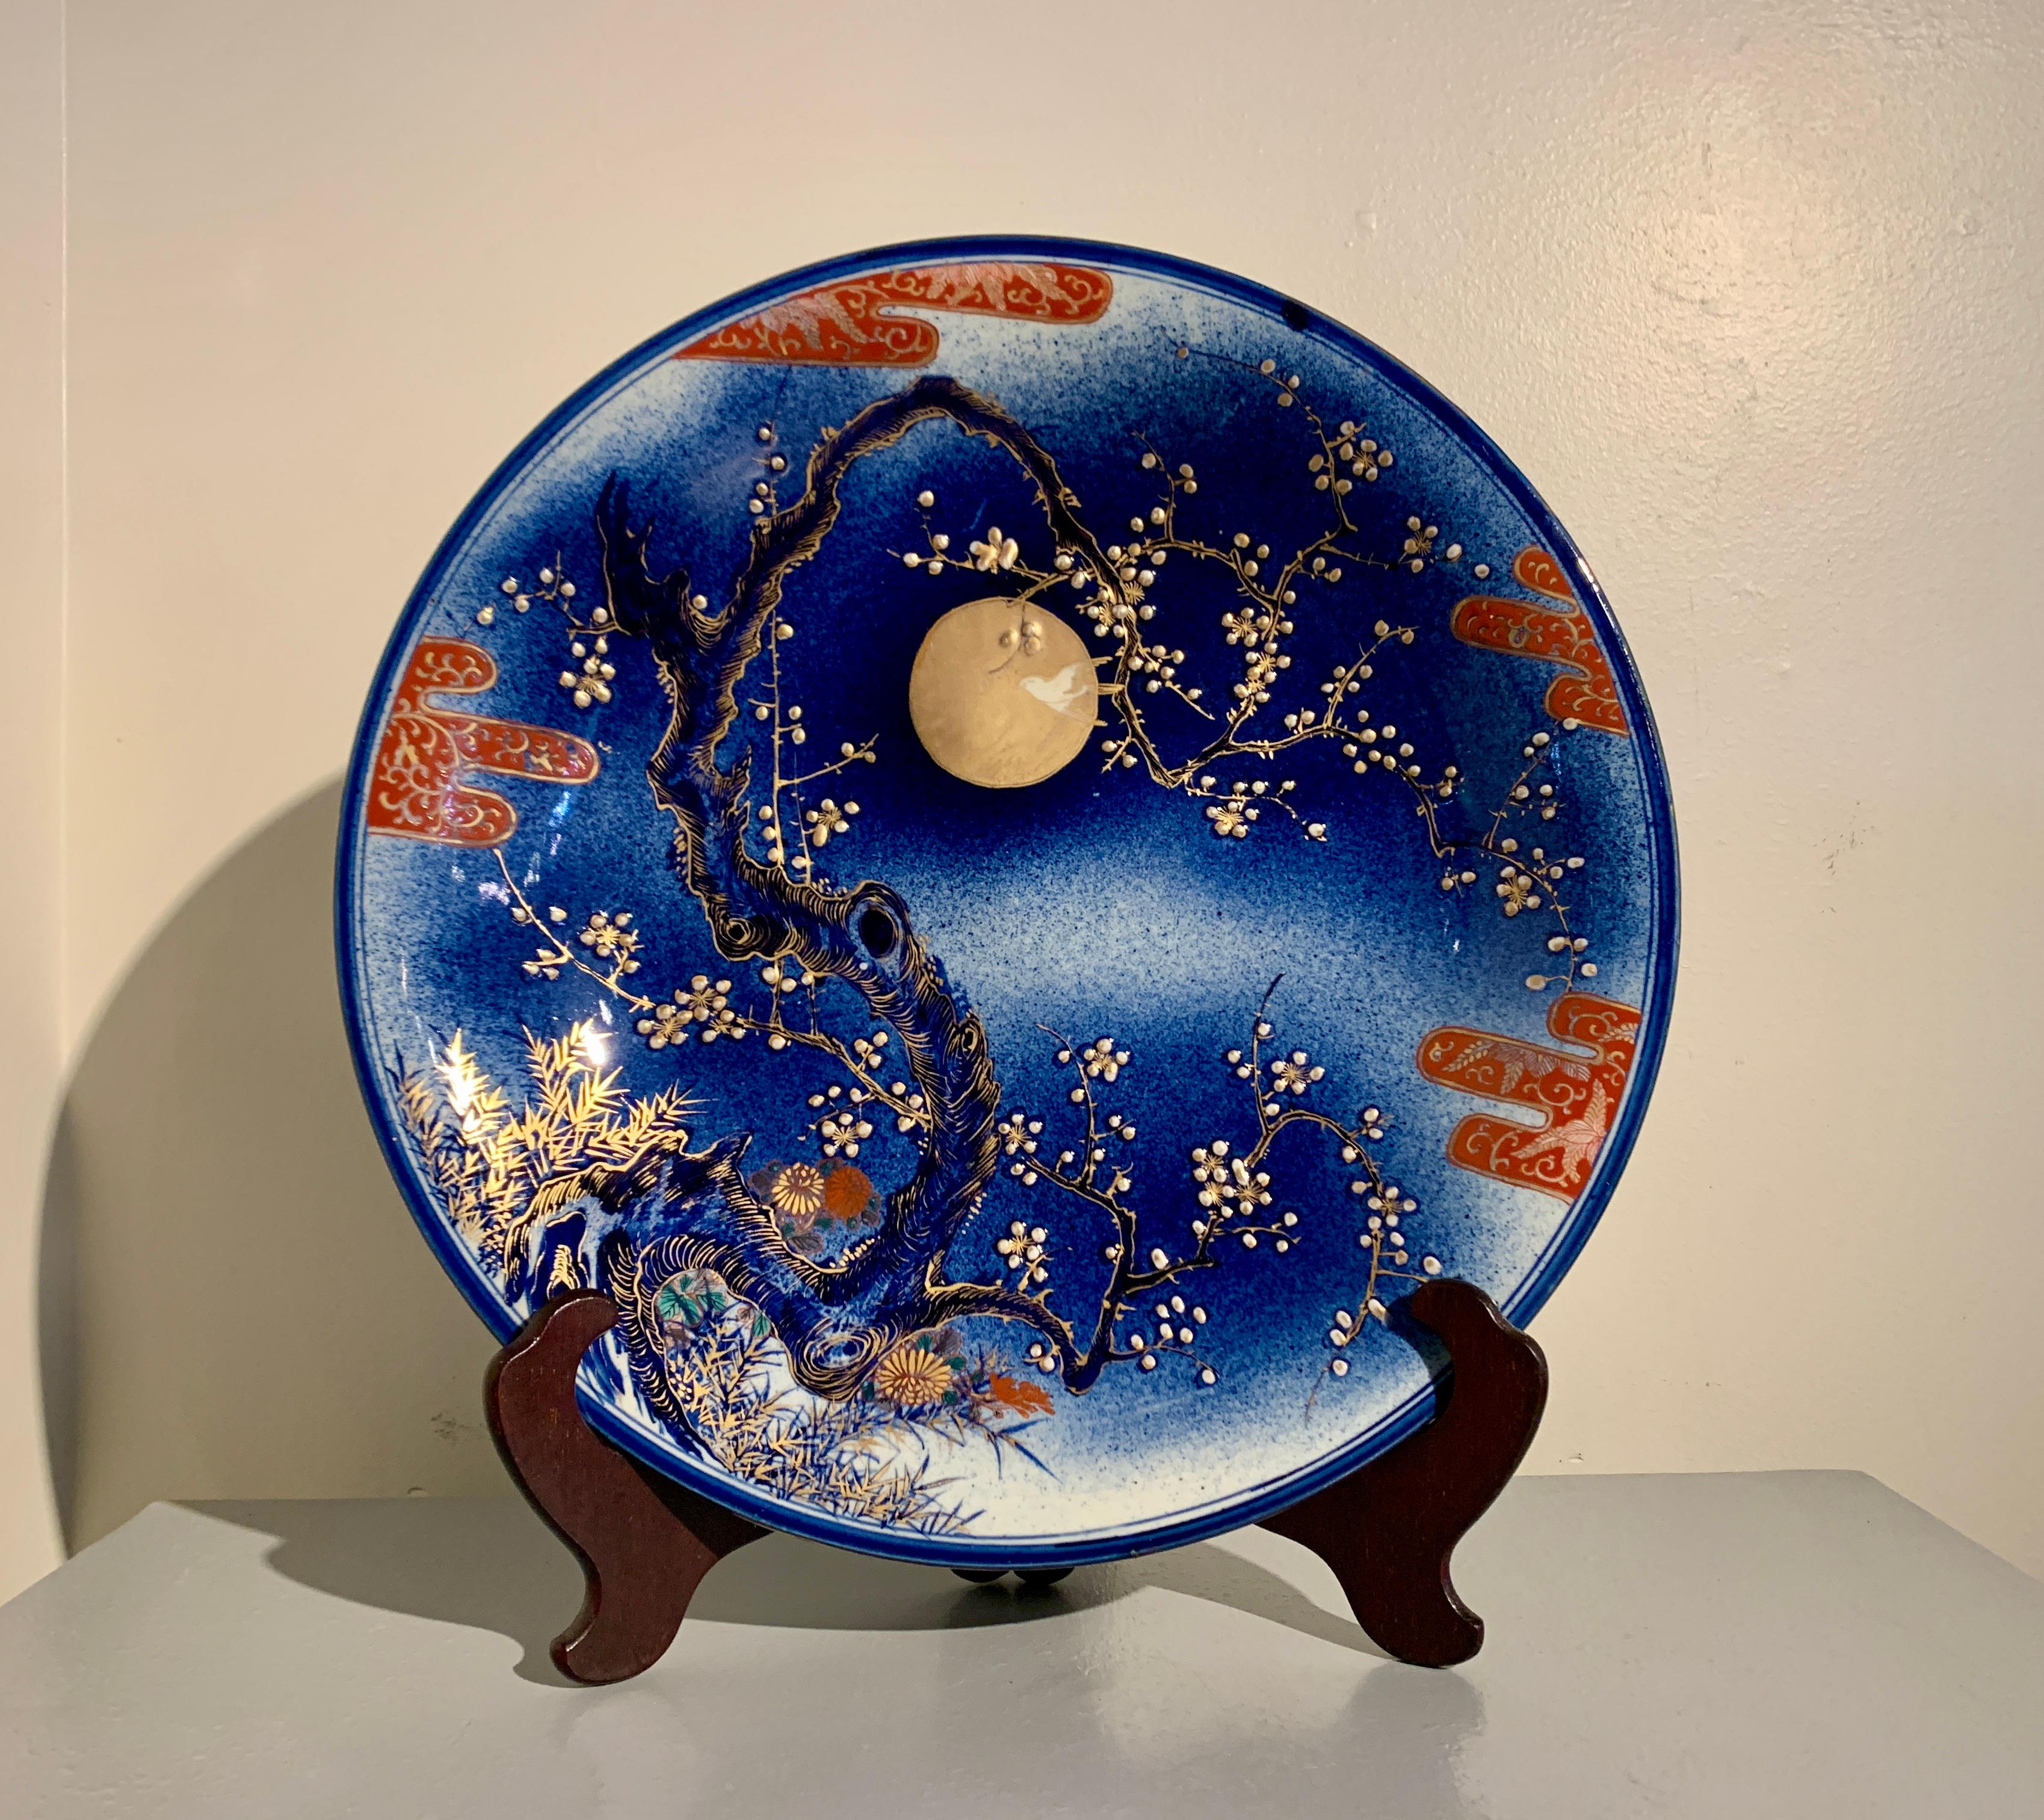 A large and boldly decorated Japanese Art Nouveau underglaze blue Imari porcelain charger with gilt and raised design, Taisho Period, circa 1915, Japan.

The charger features a fantastic design in the Art Nouveau style of a large plum tree with